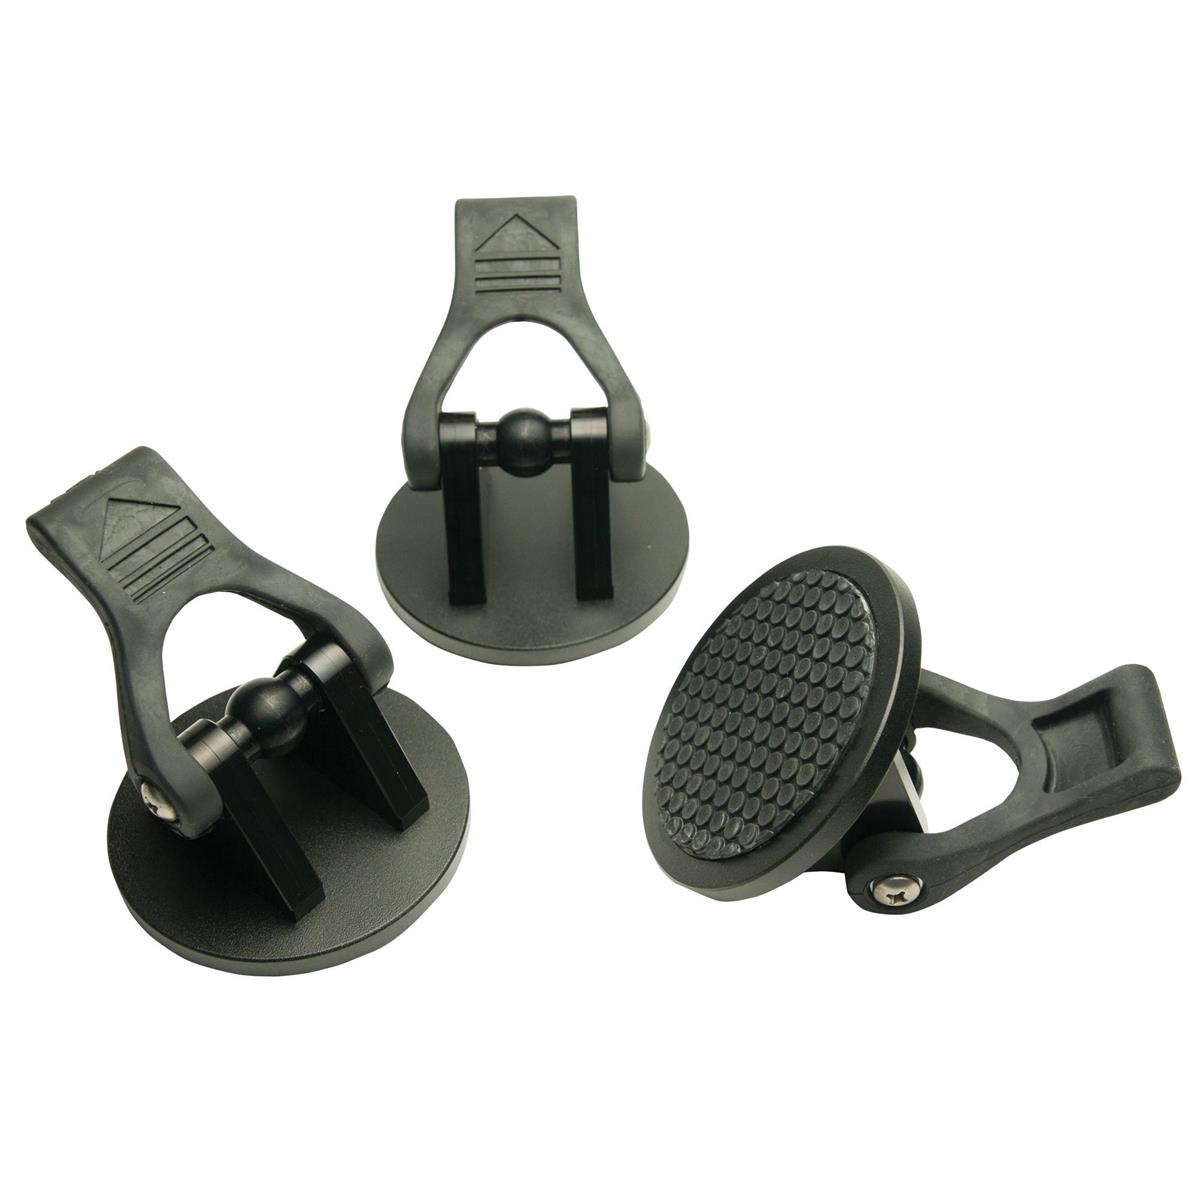 Image of Miller HD Rubber Feet Pads (Set of 3) with Above Ground Spreaders